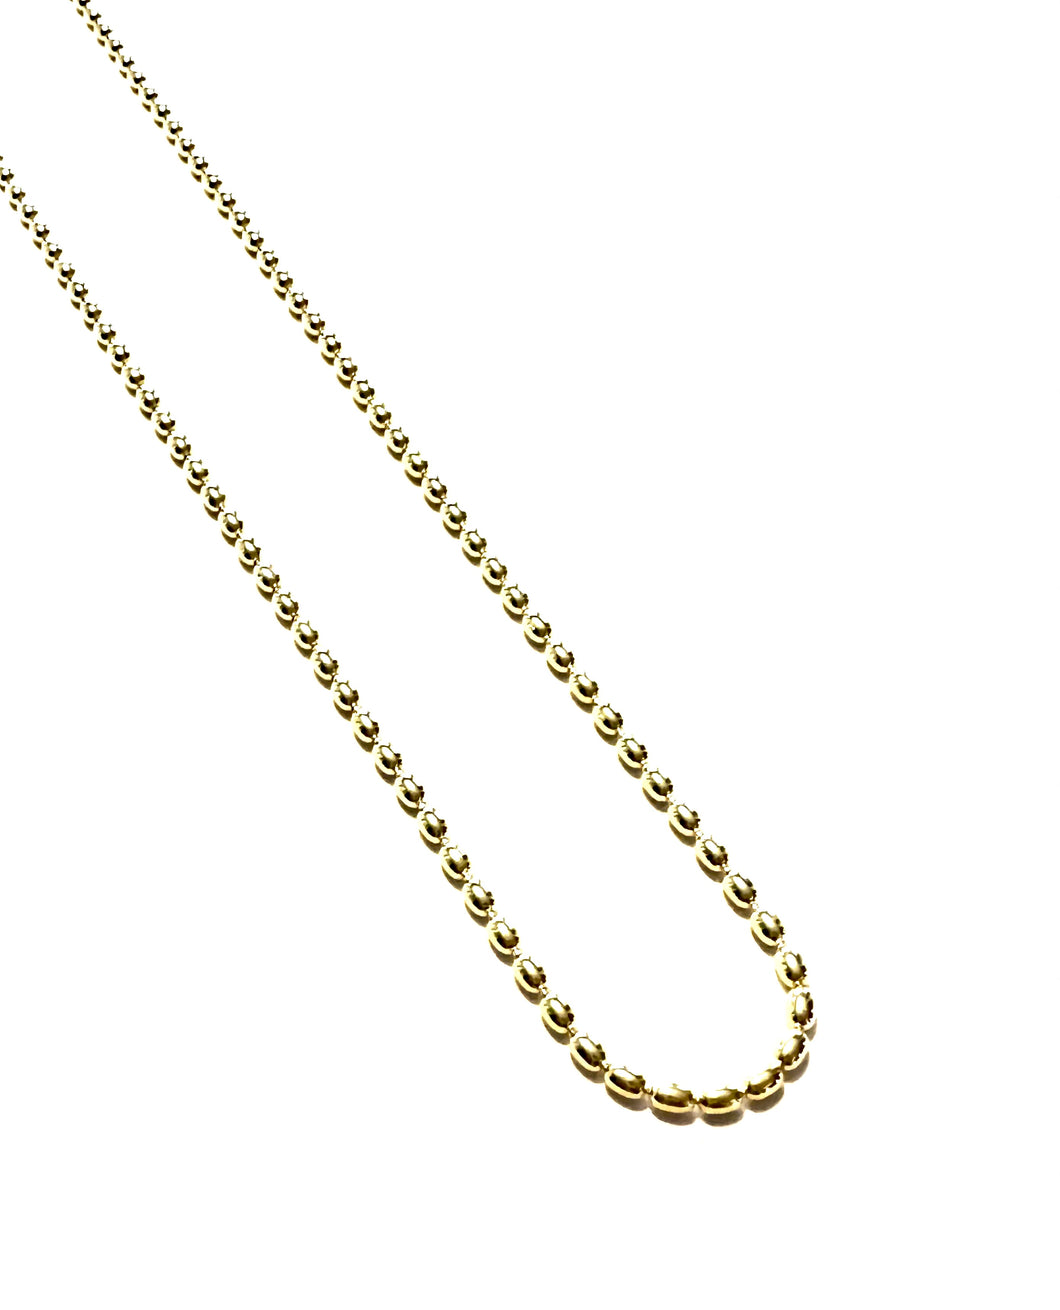 Medium Gold Plated Sterling Rice Bead Necklace